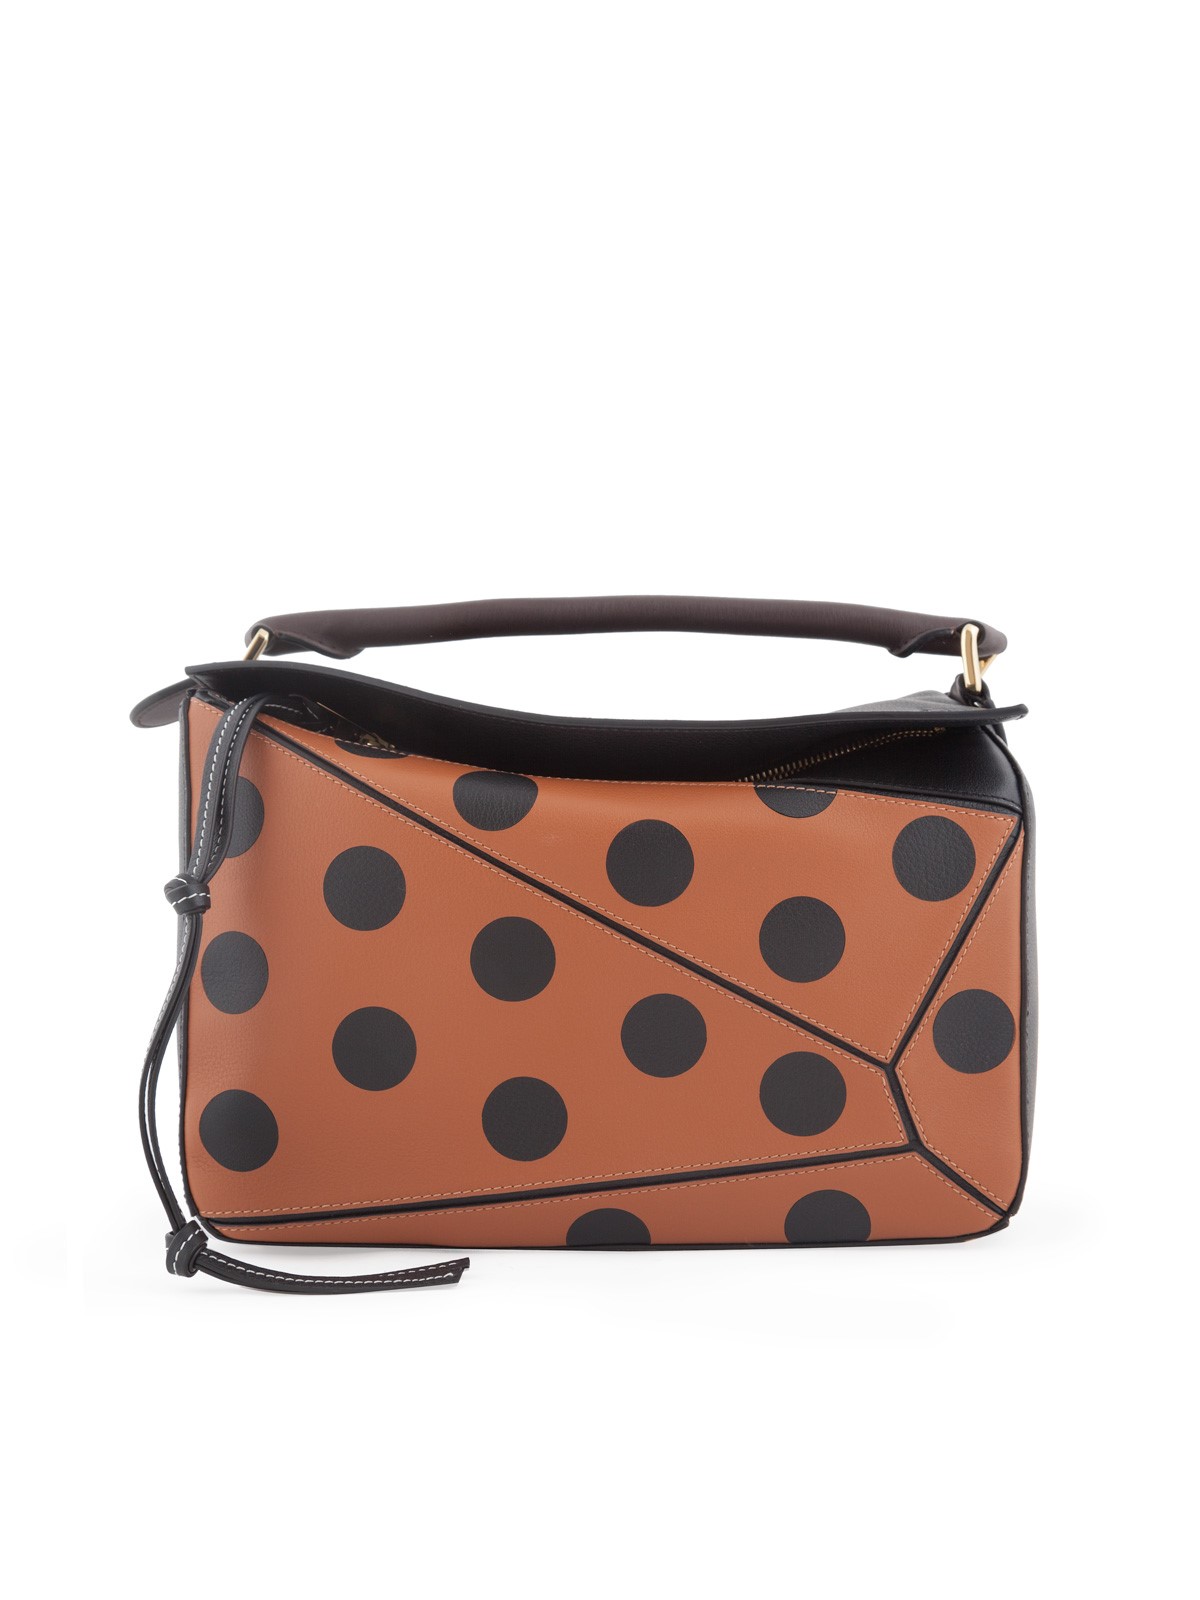 loewe POLKA DOT PUZZLE BAG available on montiboutique.com - 21437